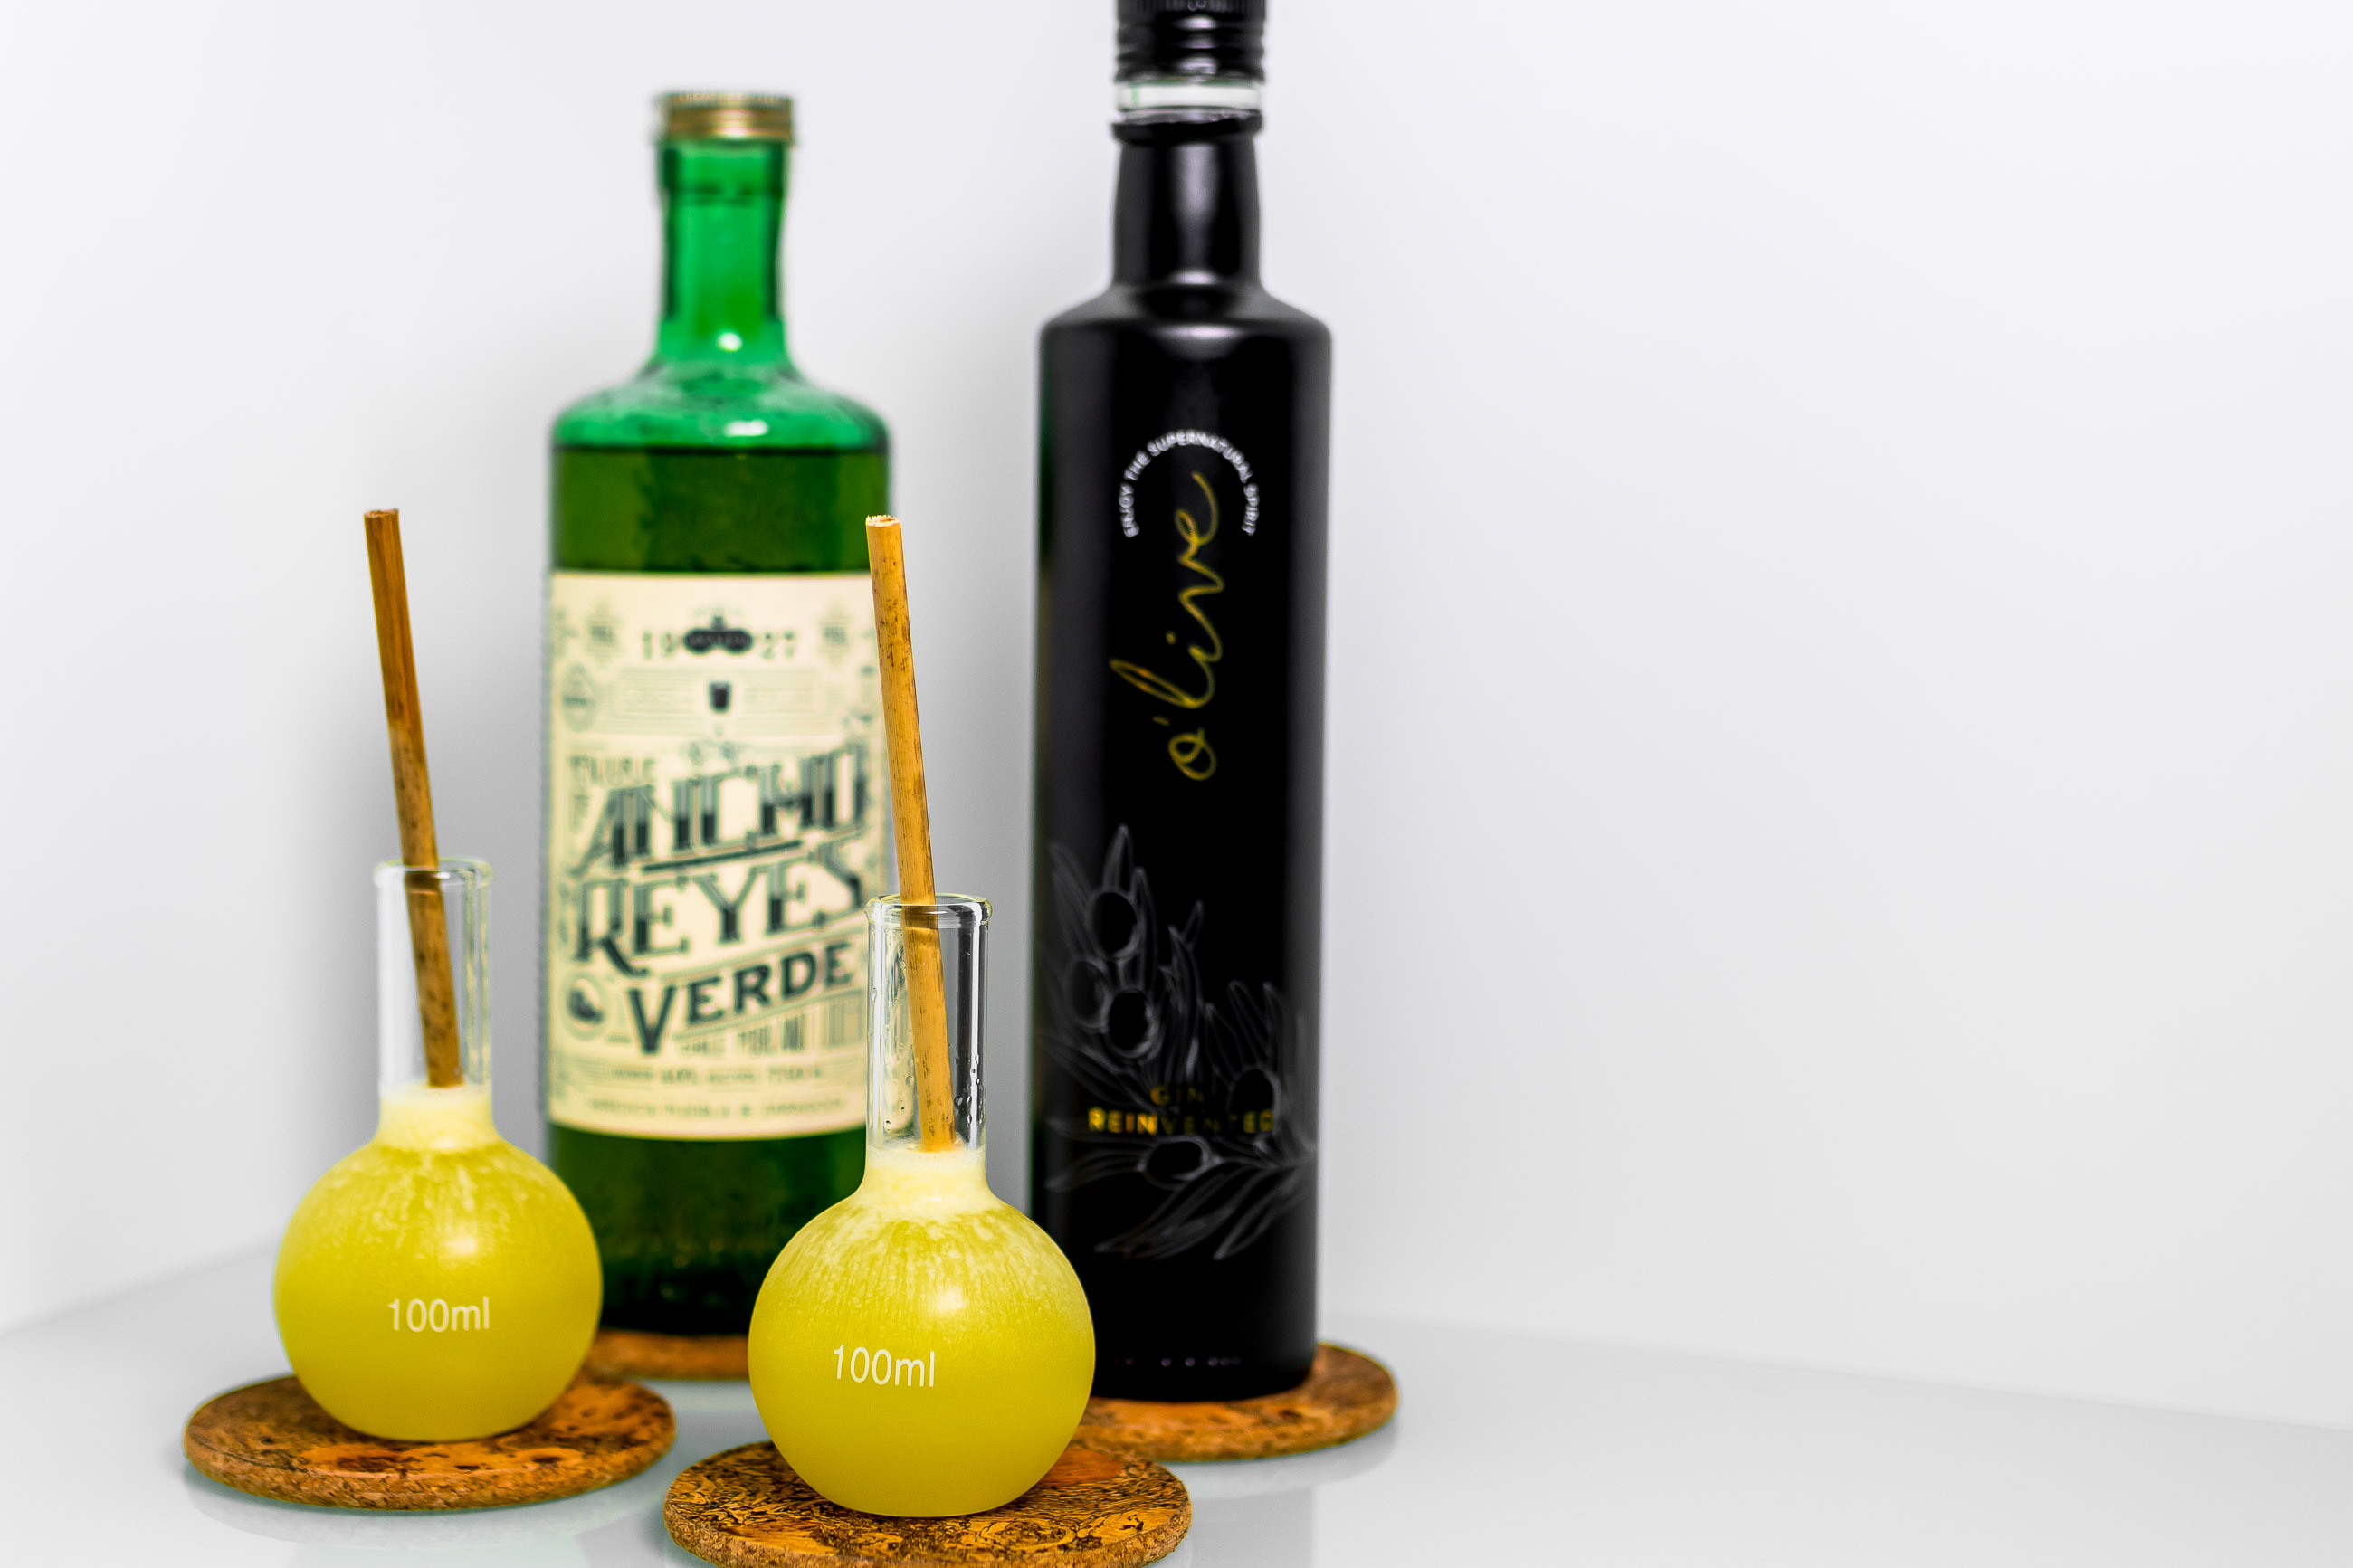 ancho reyes verde, gin, green chartreuse